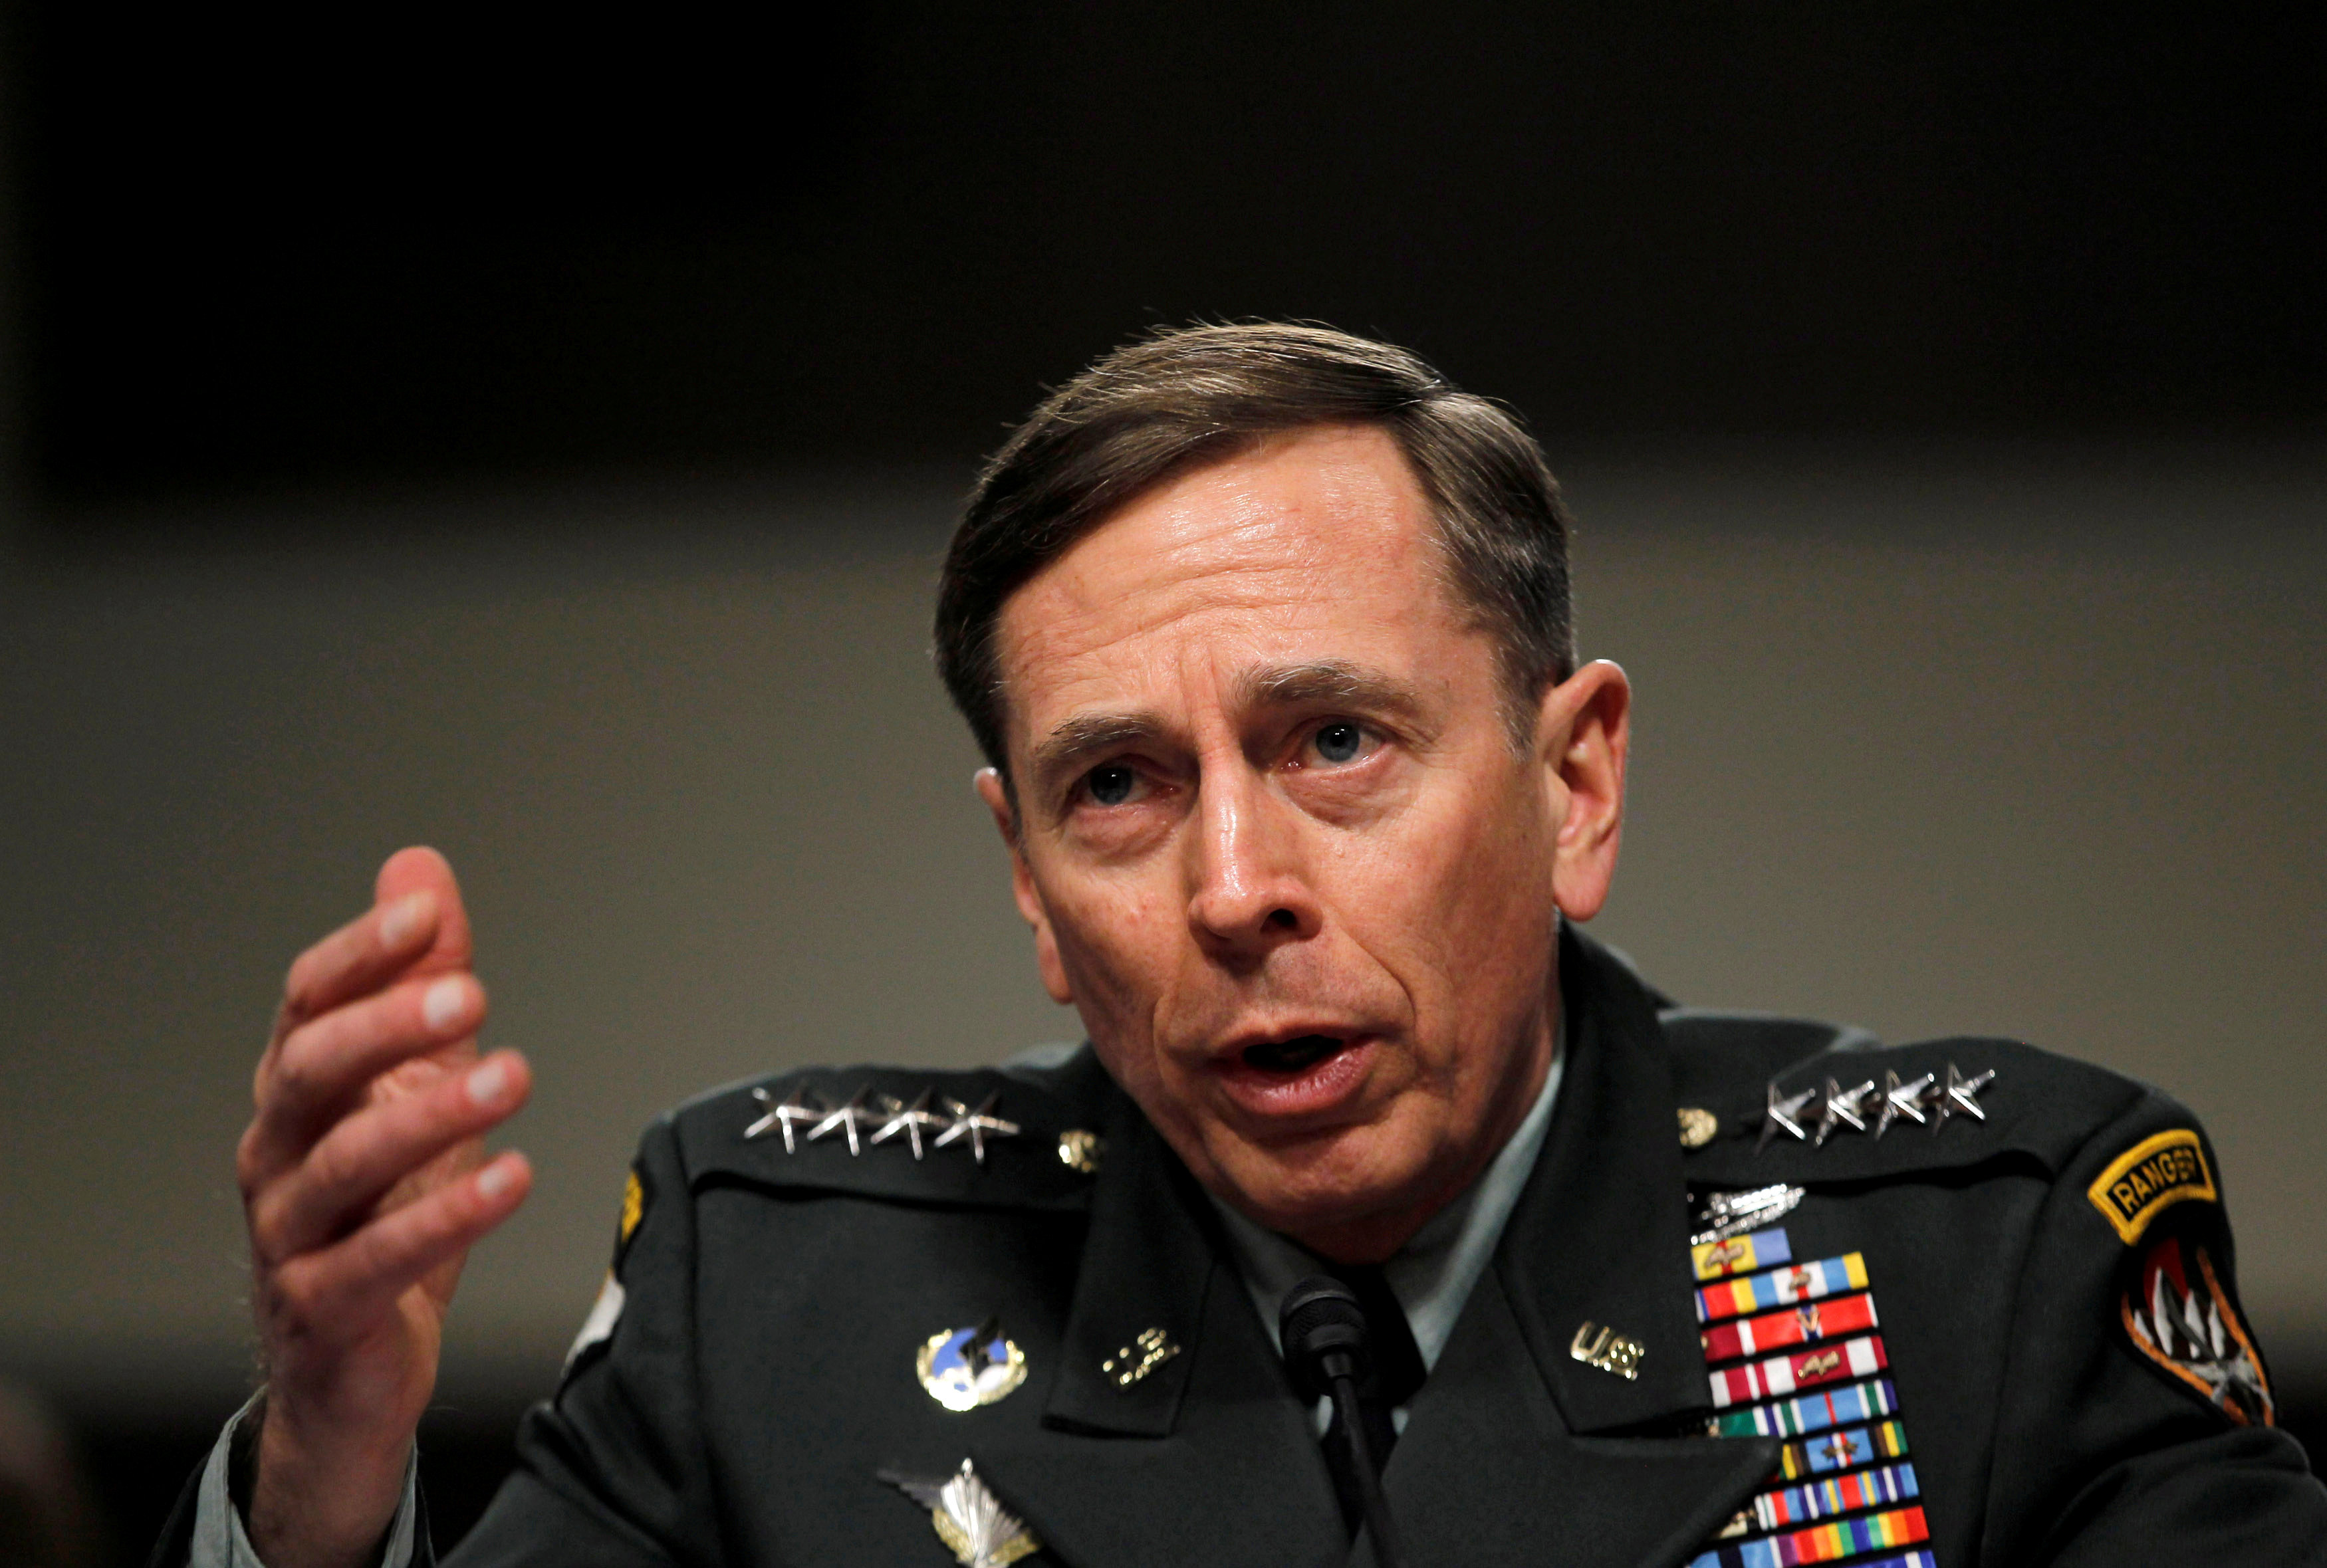 This file photo shows U.S. General David Petraeus when he was commander of the international security assistance force and commander of U.S. Forces in Afghanistan, testifying at a Senate Armed Services committee hearing on the situation in Afghanistan in 2011. Photo: Reuters